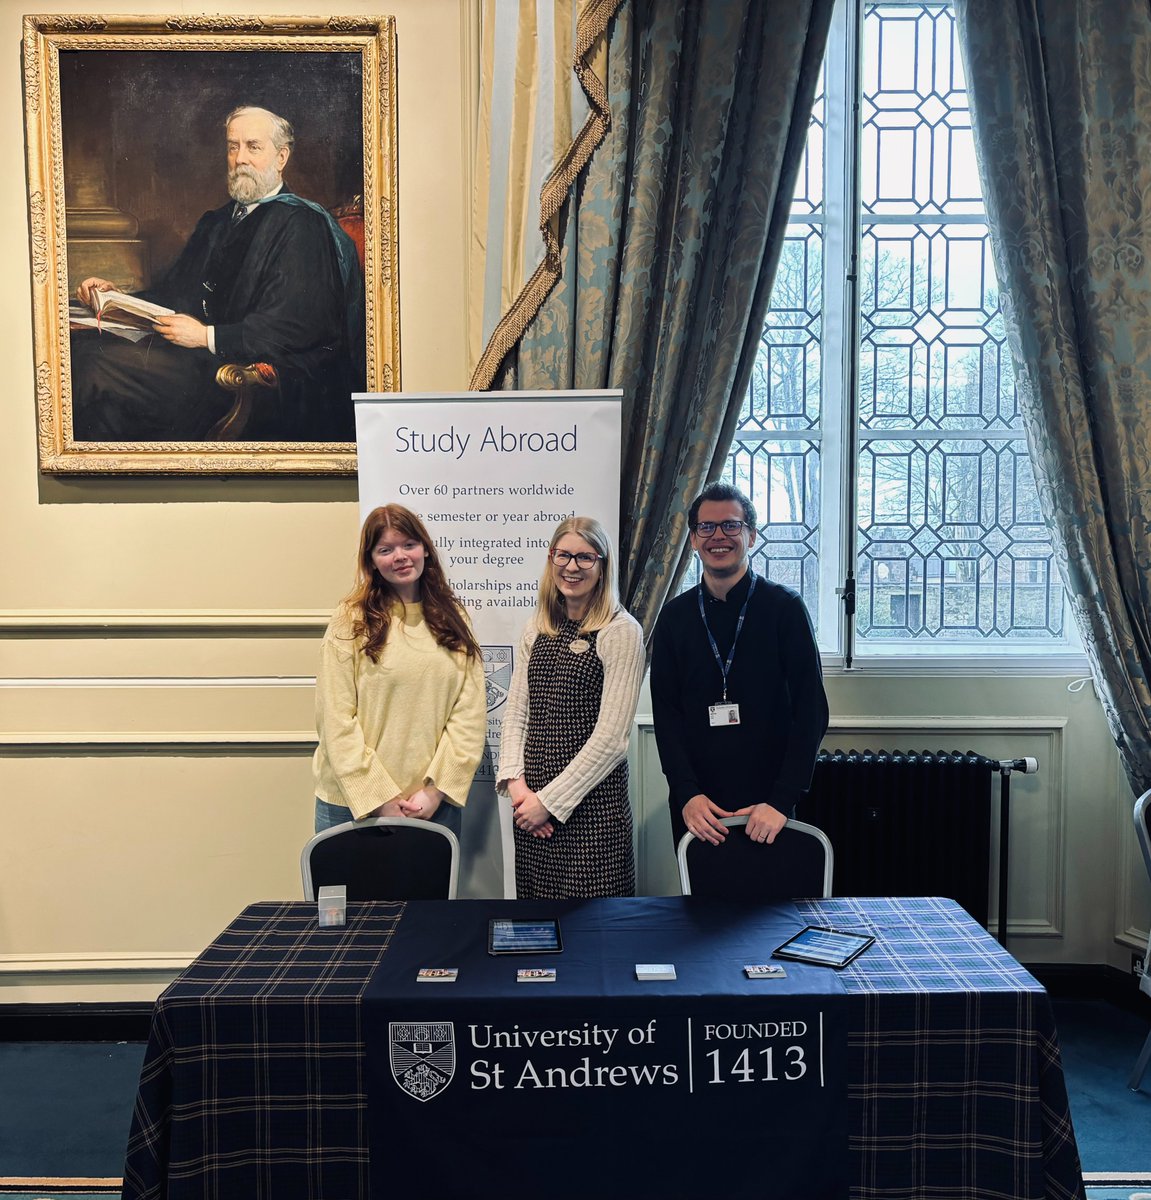 We enjoyed meeting students last weekend at the University's Offer Holder's Visit day. It was also great to see a full house for our Study Abroad talk given by Bronagh, our Outbound Student Mobility Officer! #studyabroad